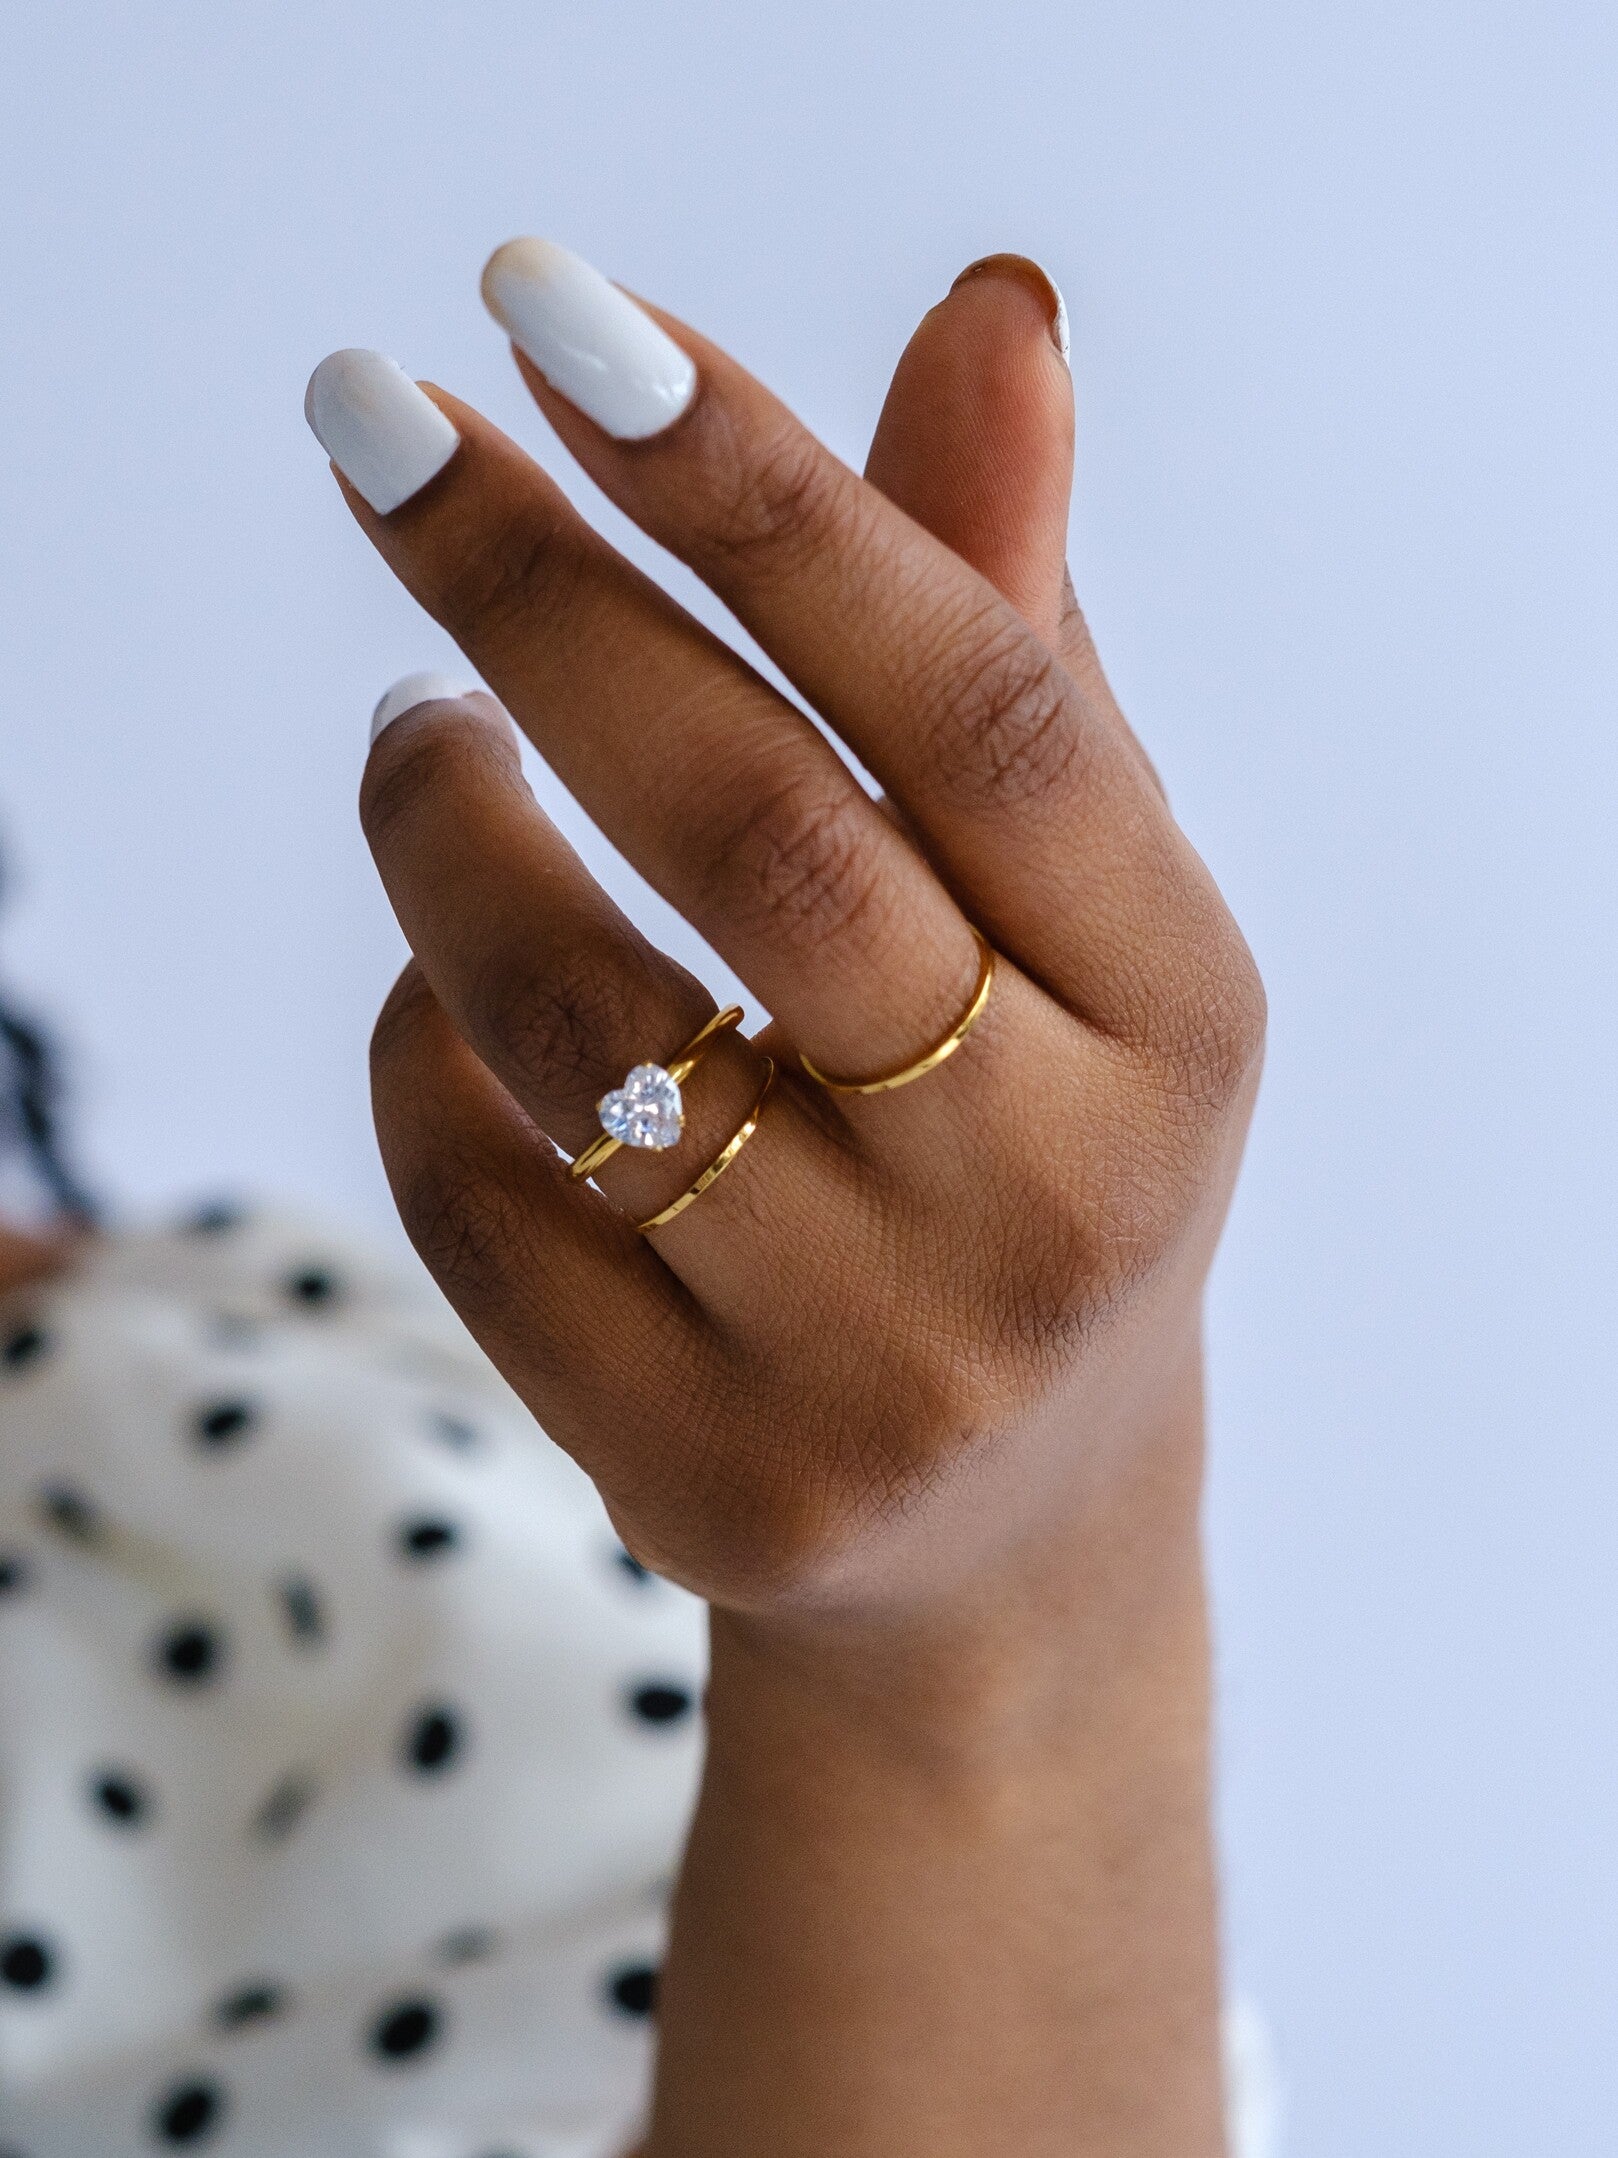 Womans' hand wearing 3 gold band rings. One ring has a clear heart crystal, the other two are slim stacking rings